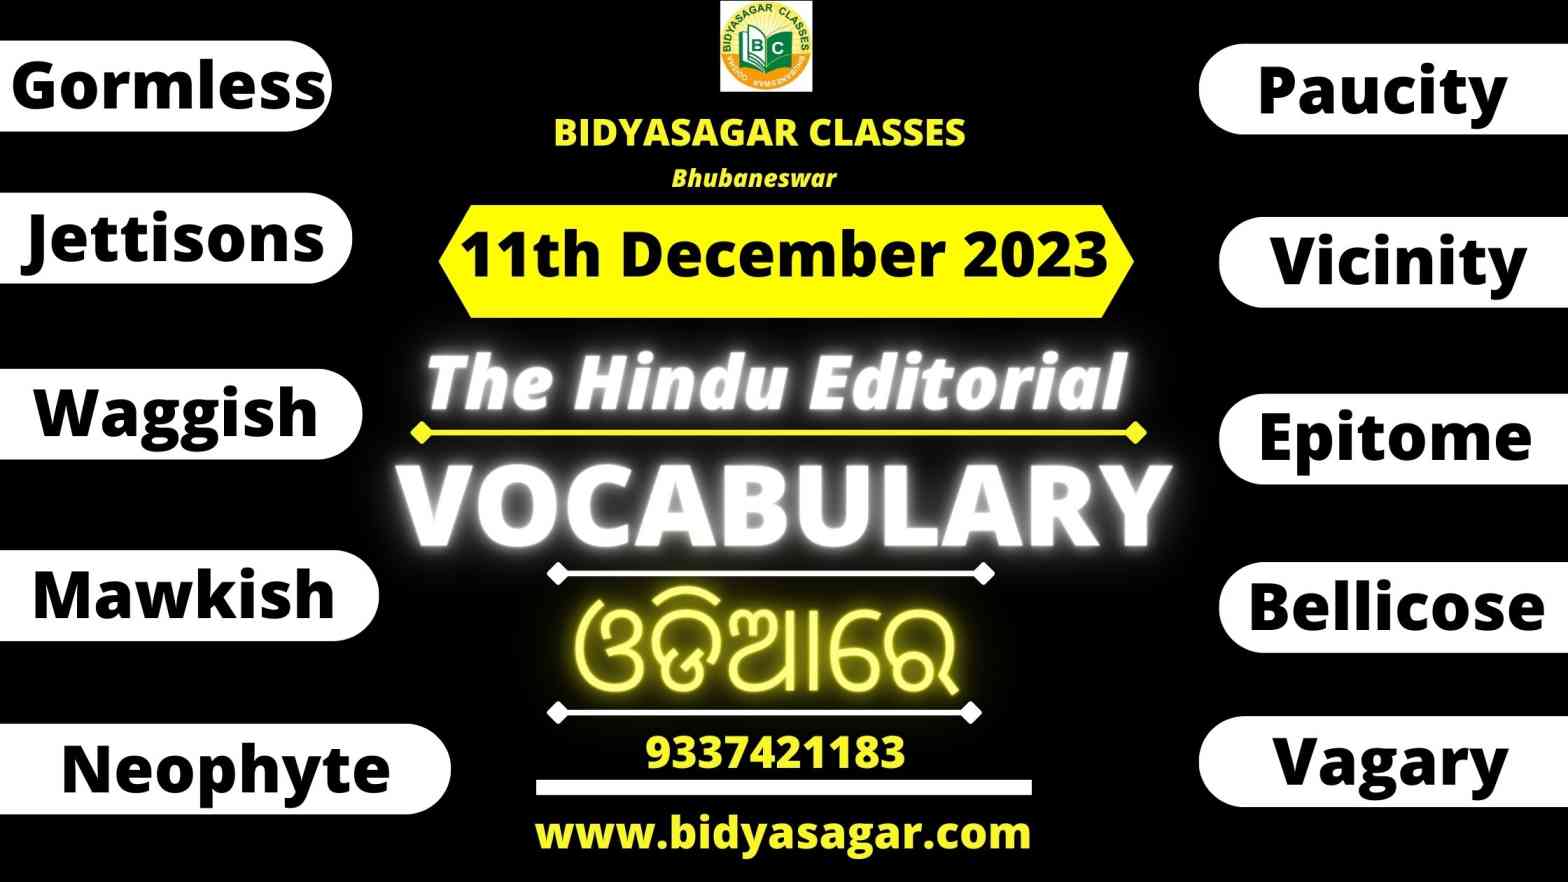 The Hindu Editorial Vocabulary of 11th December 2023